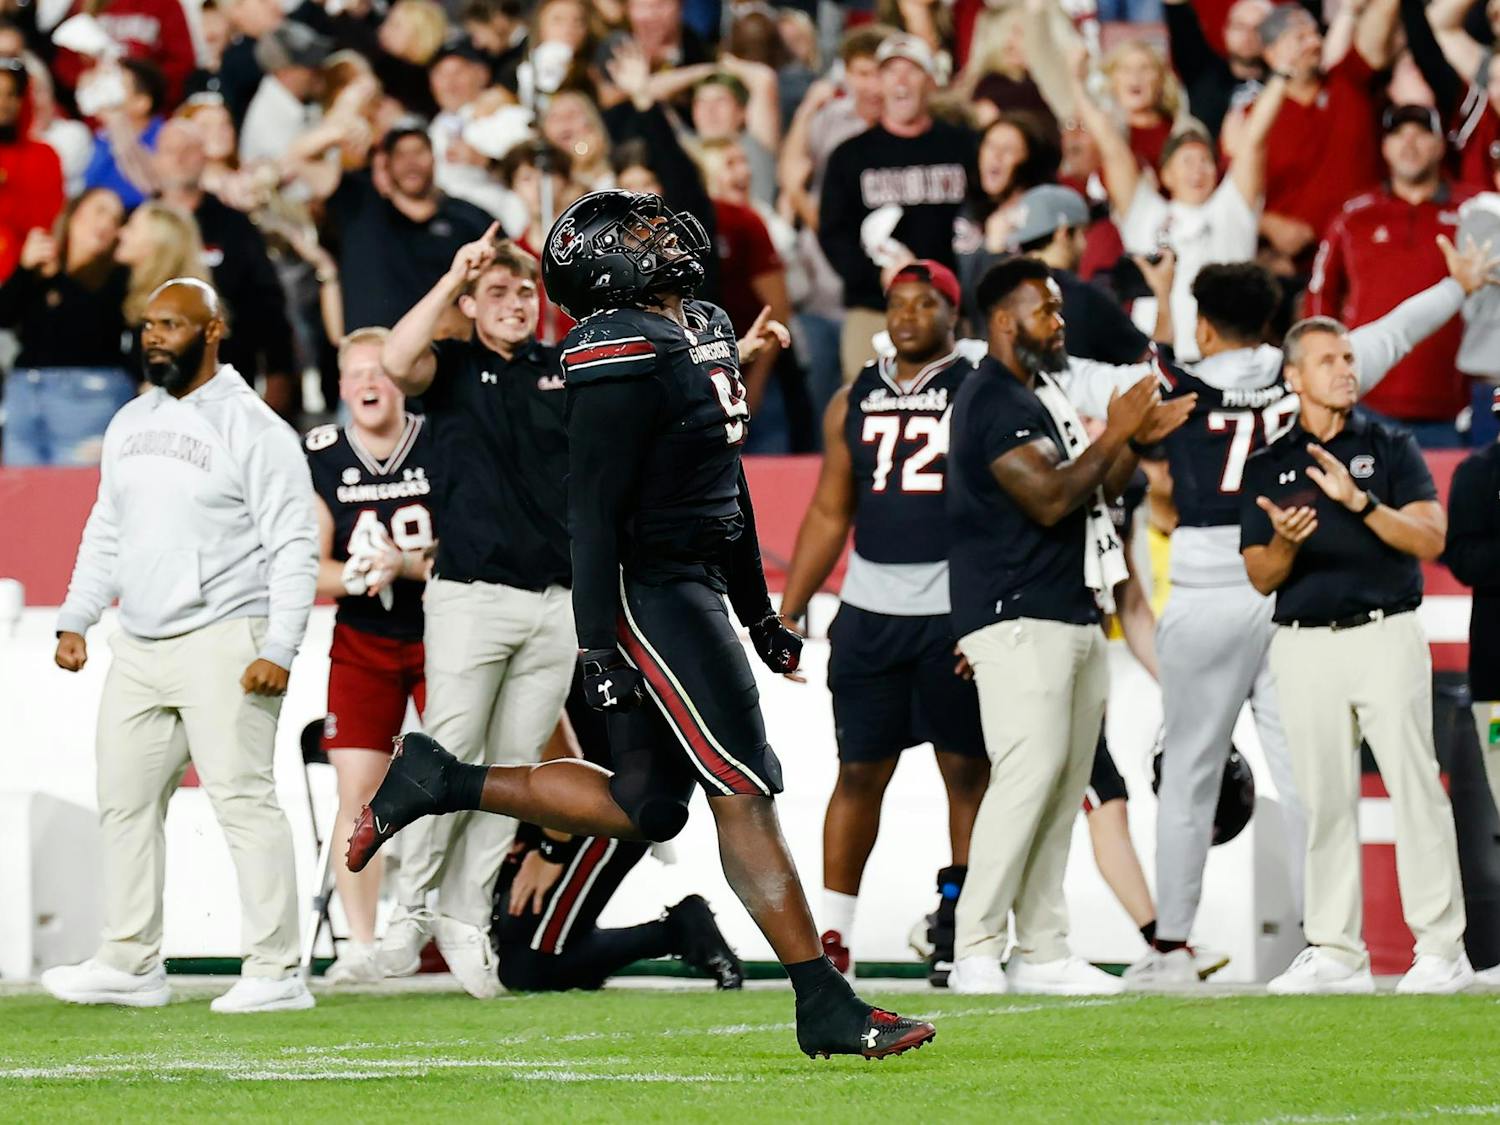 Senior defensive tackle Tonka Hemingway celebrates a fumble recovery during the fourth quarter against Kentucky on Nov. 18, 2023. The Wildcats had three turnovers in the game against the Gamecocks.